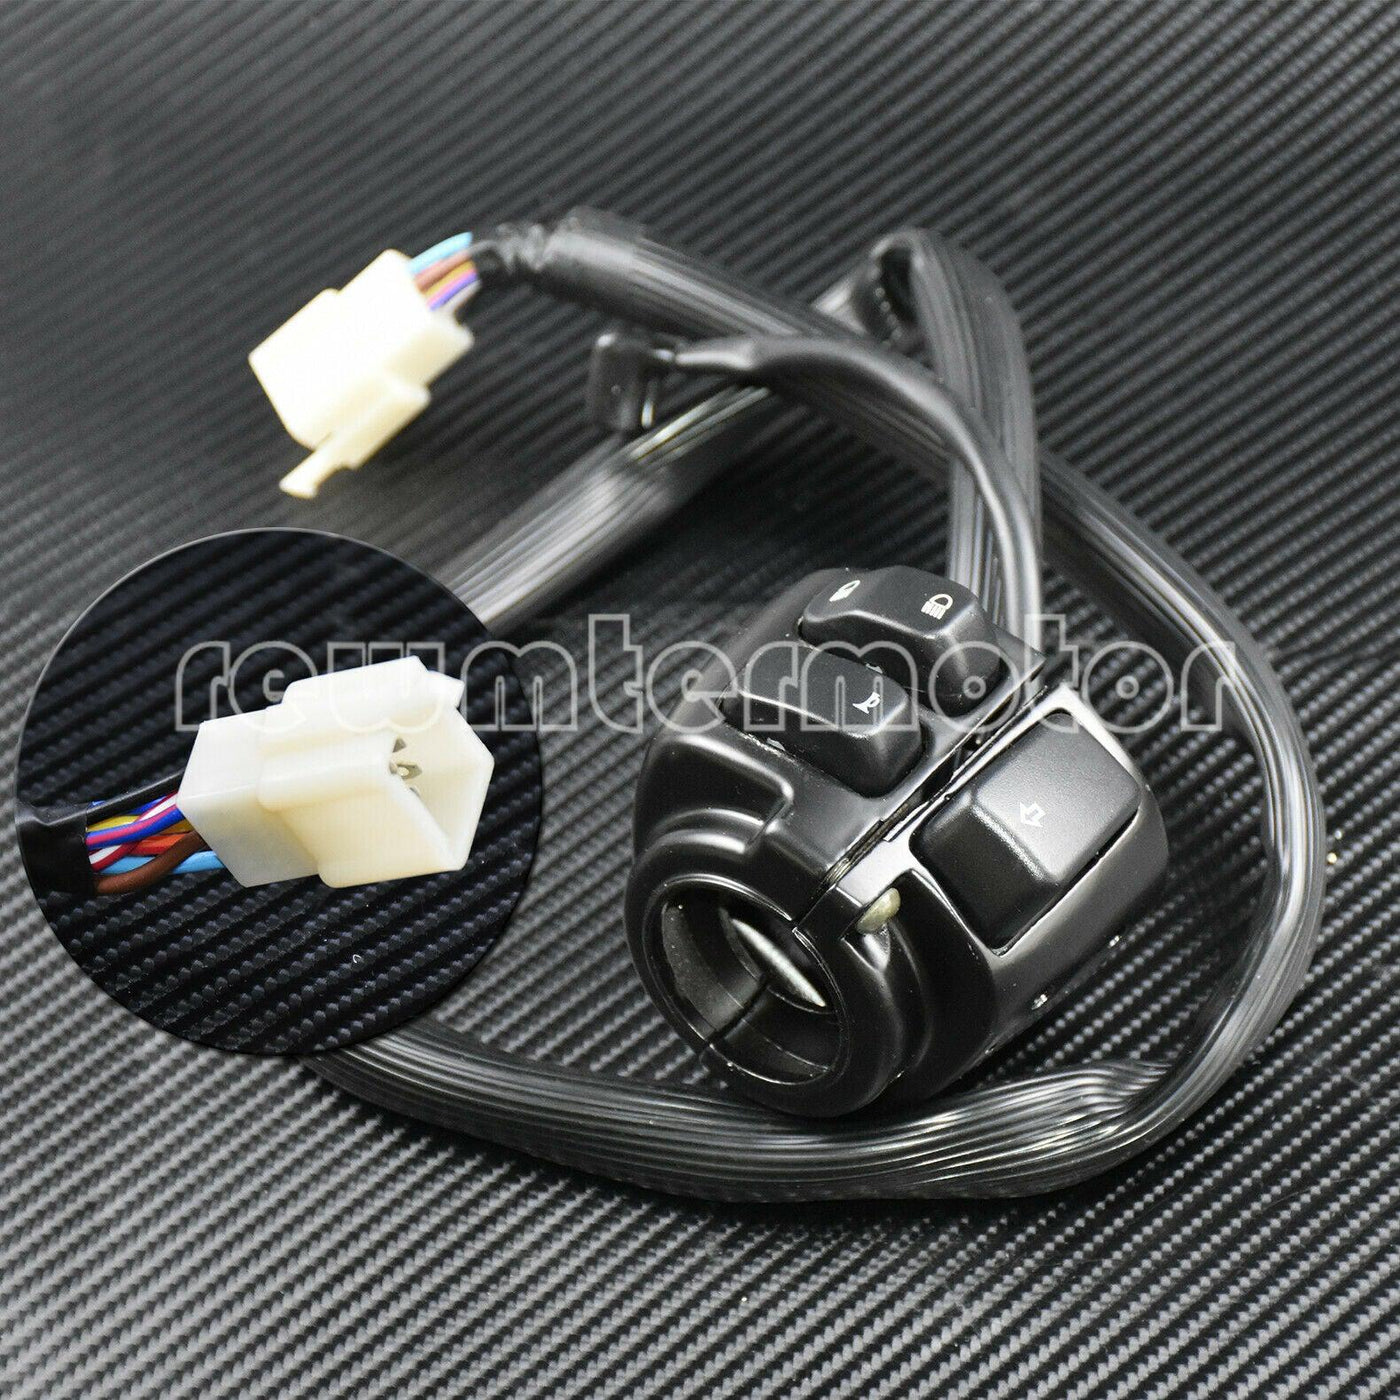 Black 1" Handlebar Control Switches Wiring Harness Fit For Harley Sportster Dyna - Moto Life Products